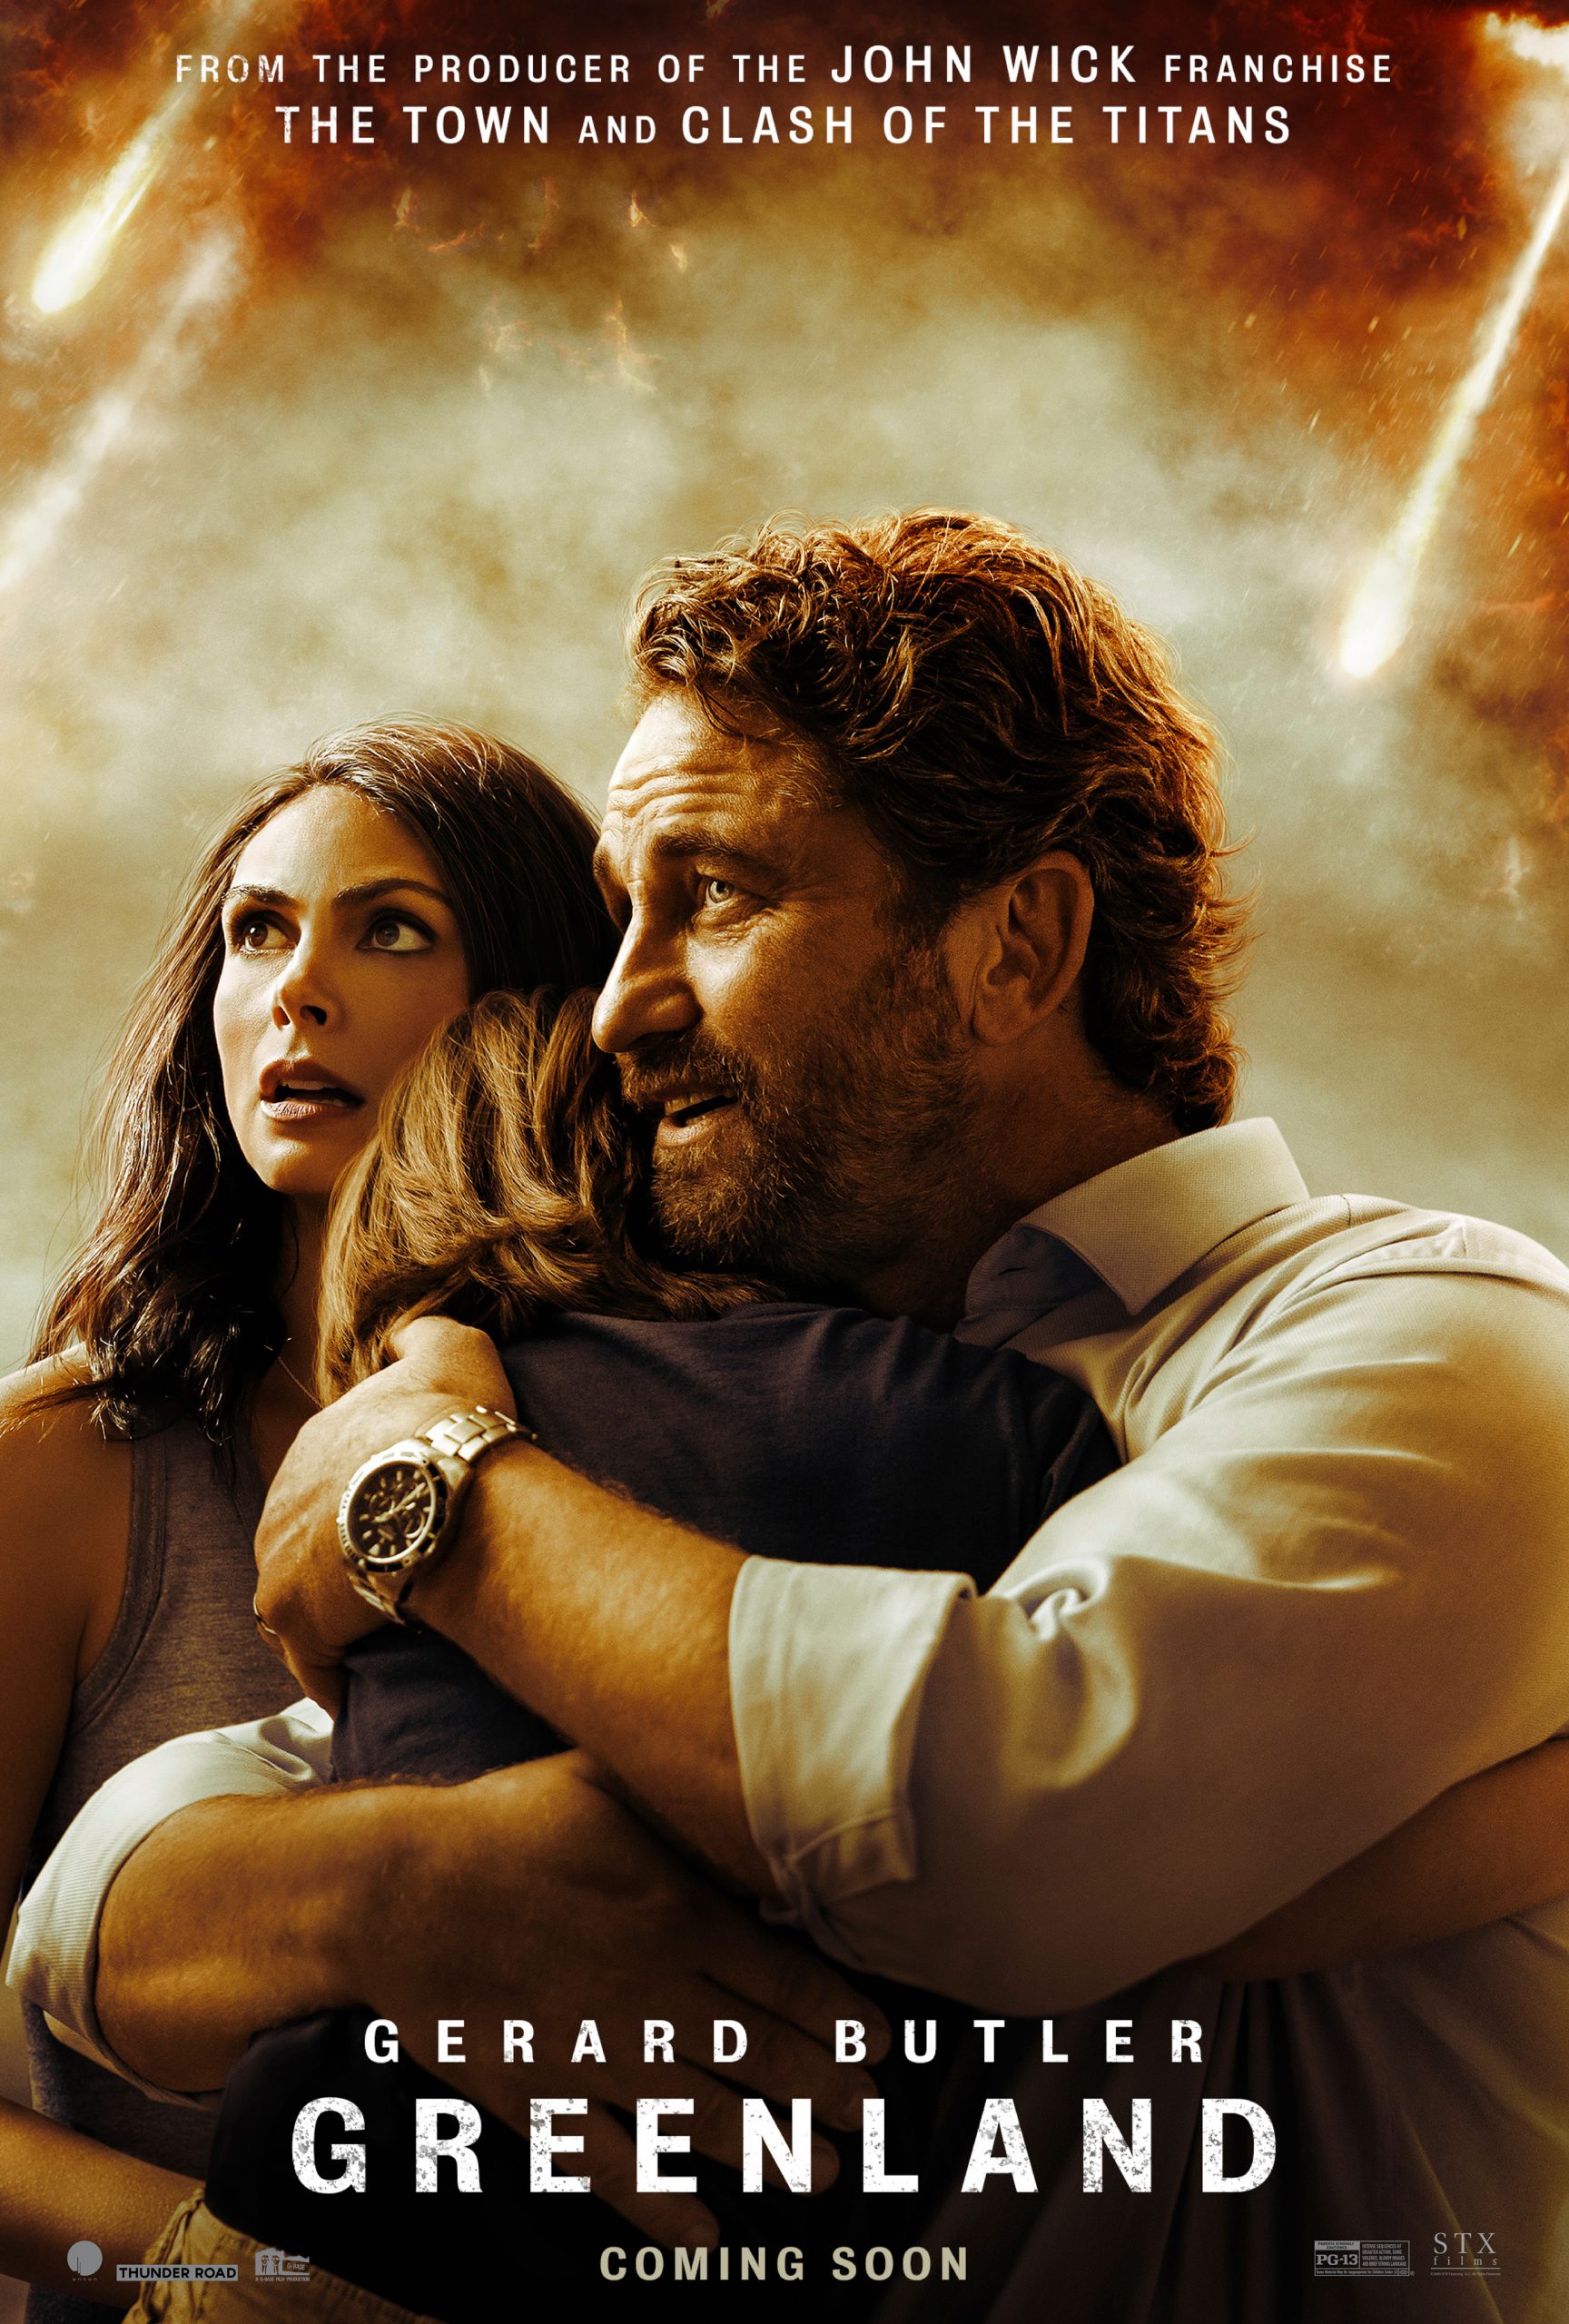 [News] Prepare for Disaster in New GREENLAND Trailer Starring Gerard Butler